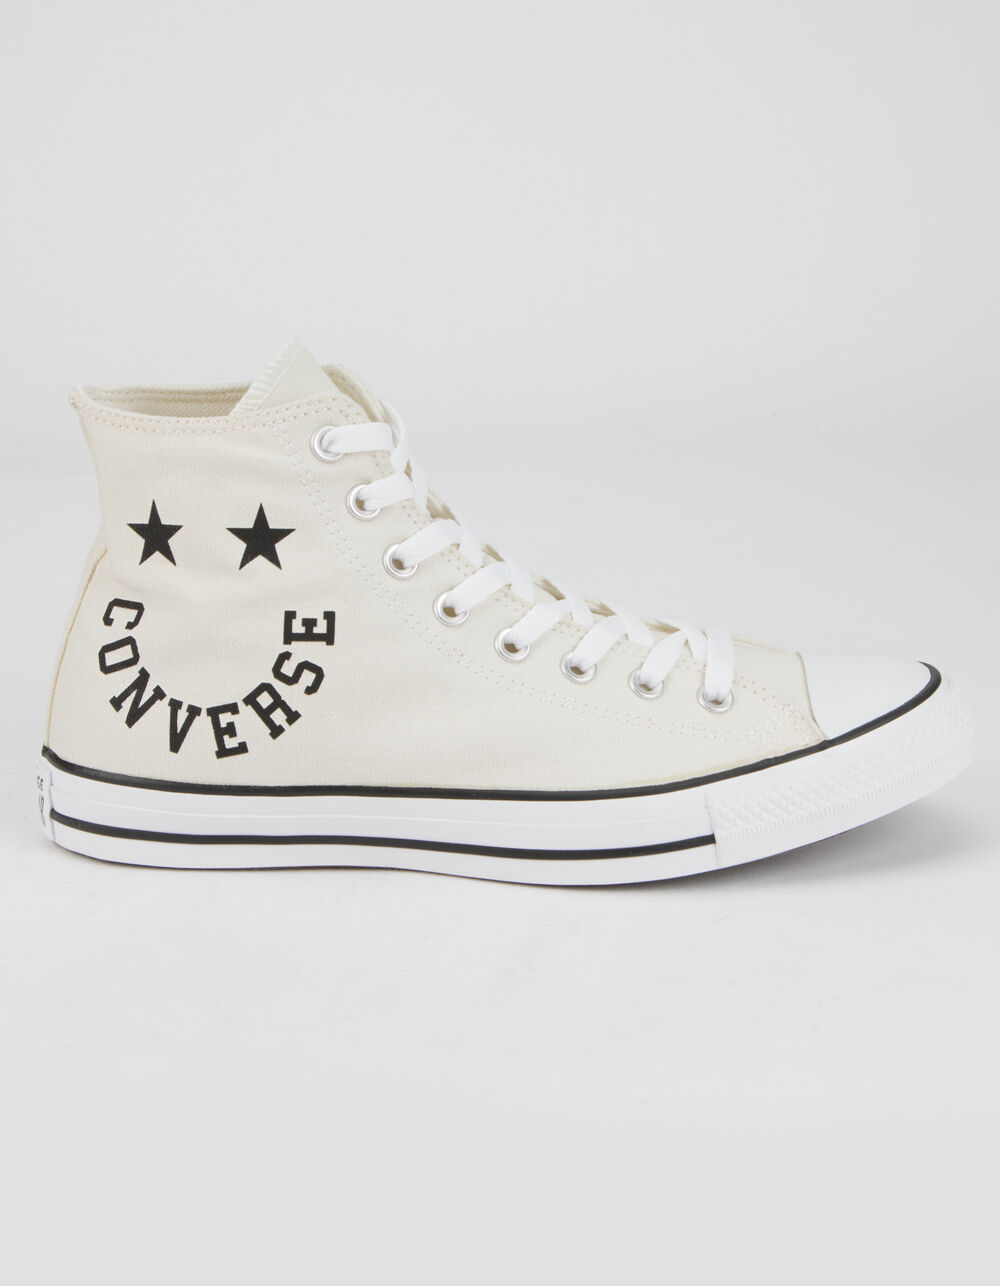 CONVERSE Cheerful Chuck Taylor All Star Egret High Top Shoes - EGRET ...